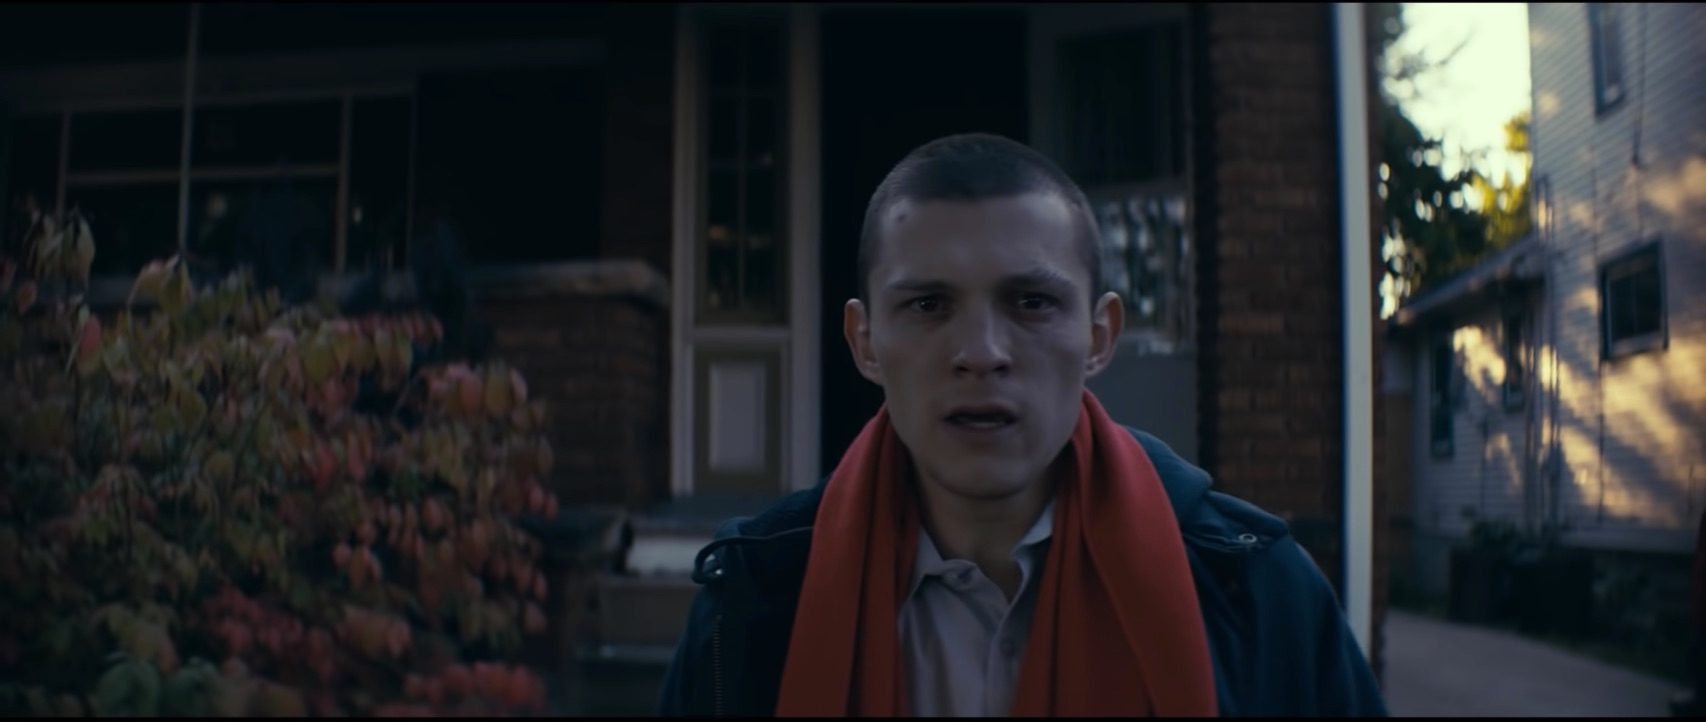 Tom Holland goes through transformation in opioid crisis movie ‘Cherry’